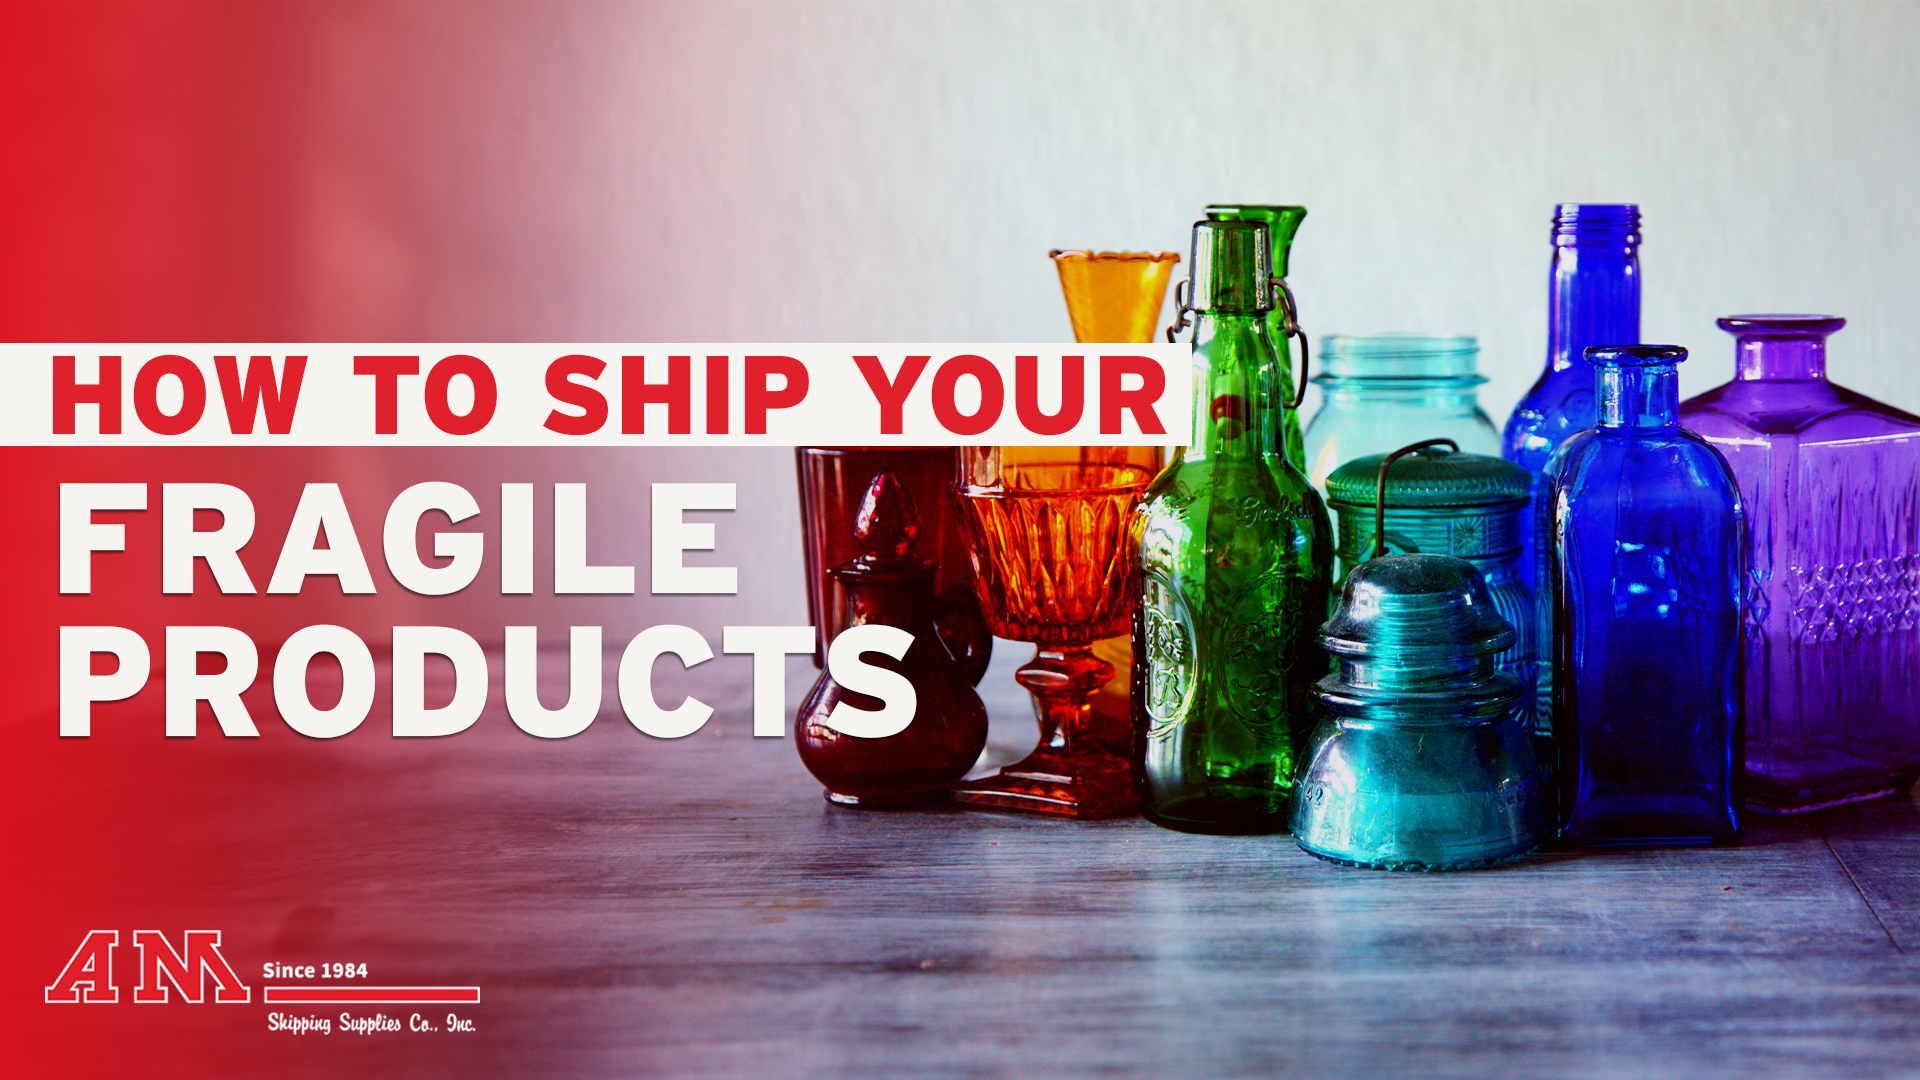 How to Ship Your Fragile Products